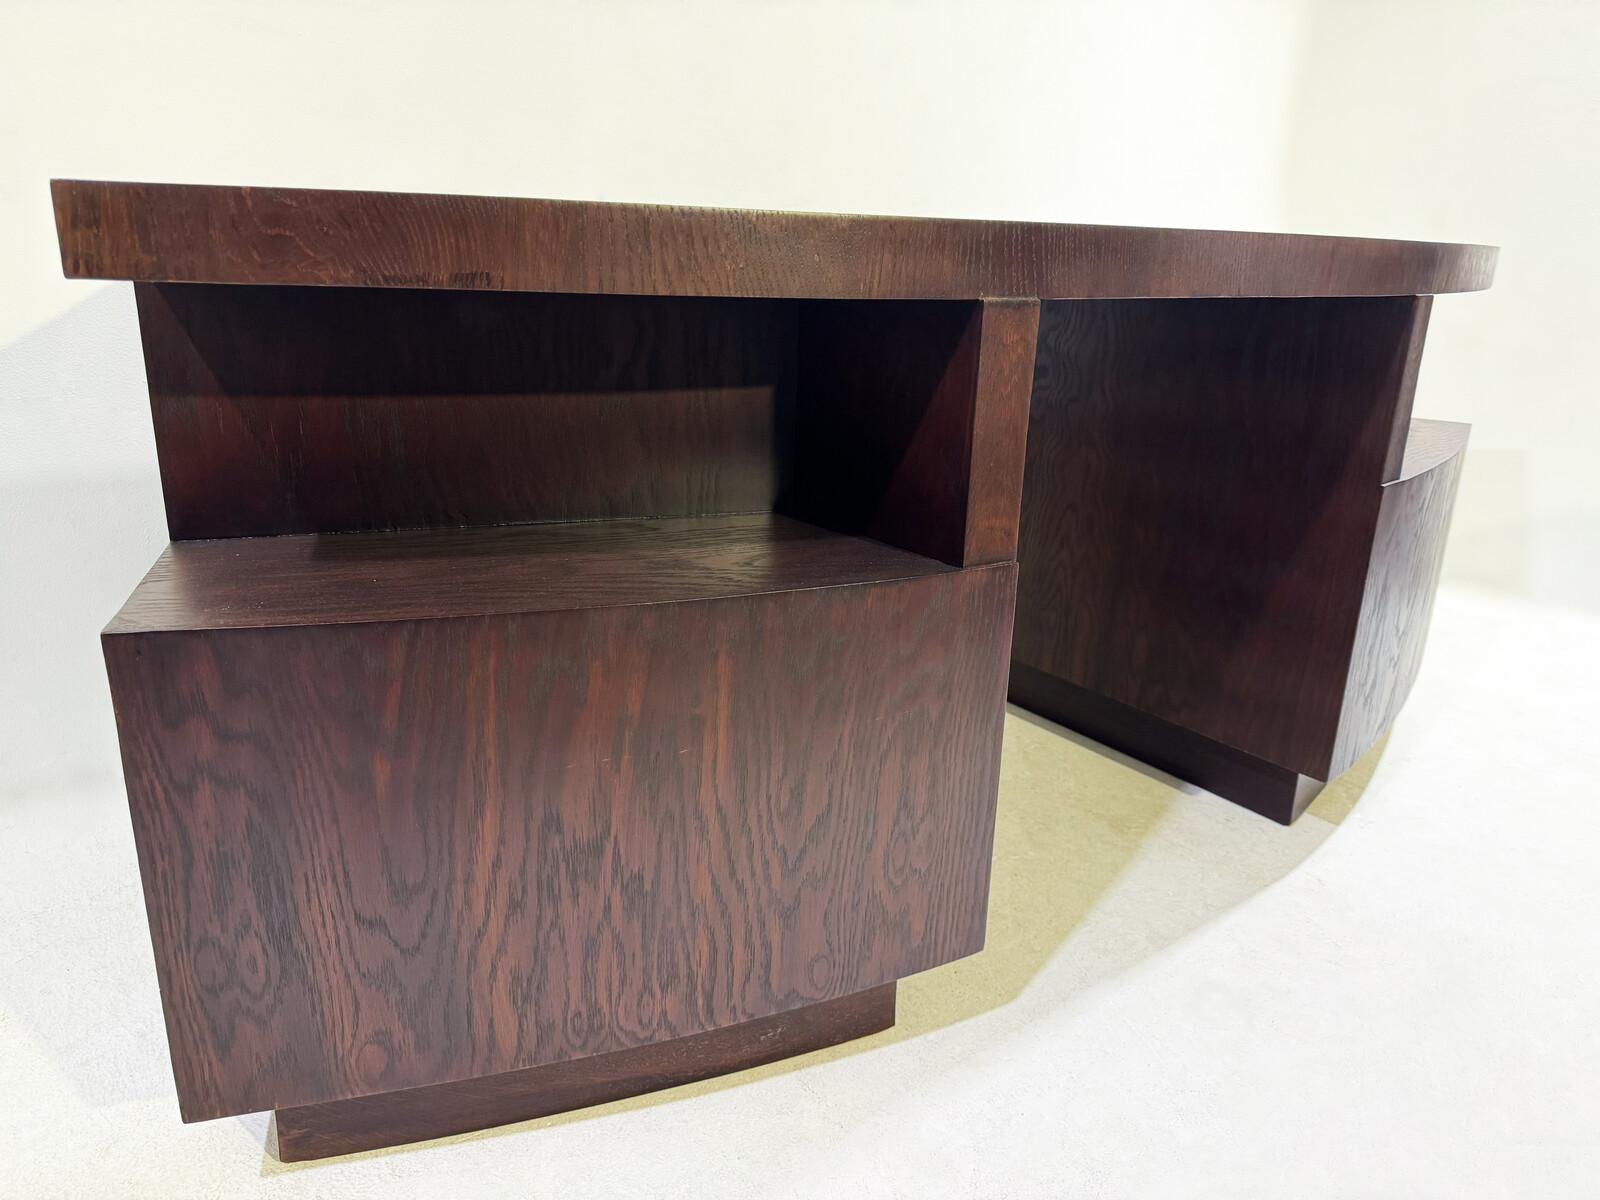 Wooden Art Deco Desk with Drawers, 1930s For Sale 6